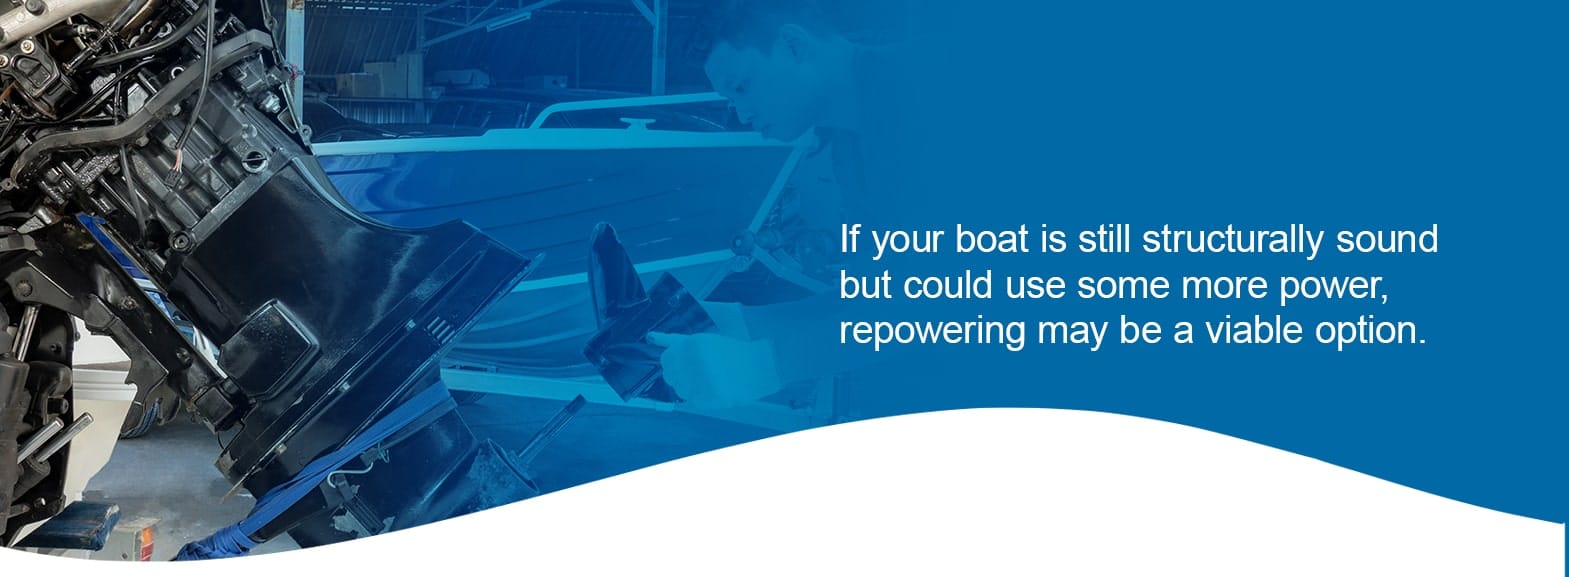 Is It Better to Repower a Boat or Buy New? If your boat is still structurally sound but could use some more power, repowering may be a viable option.